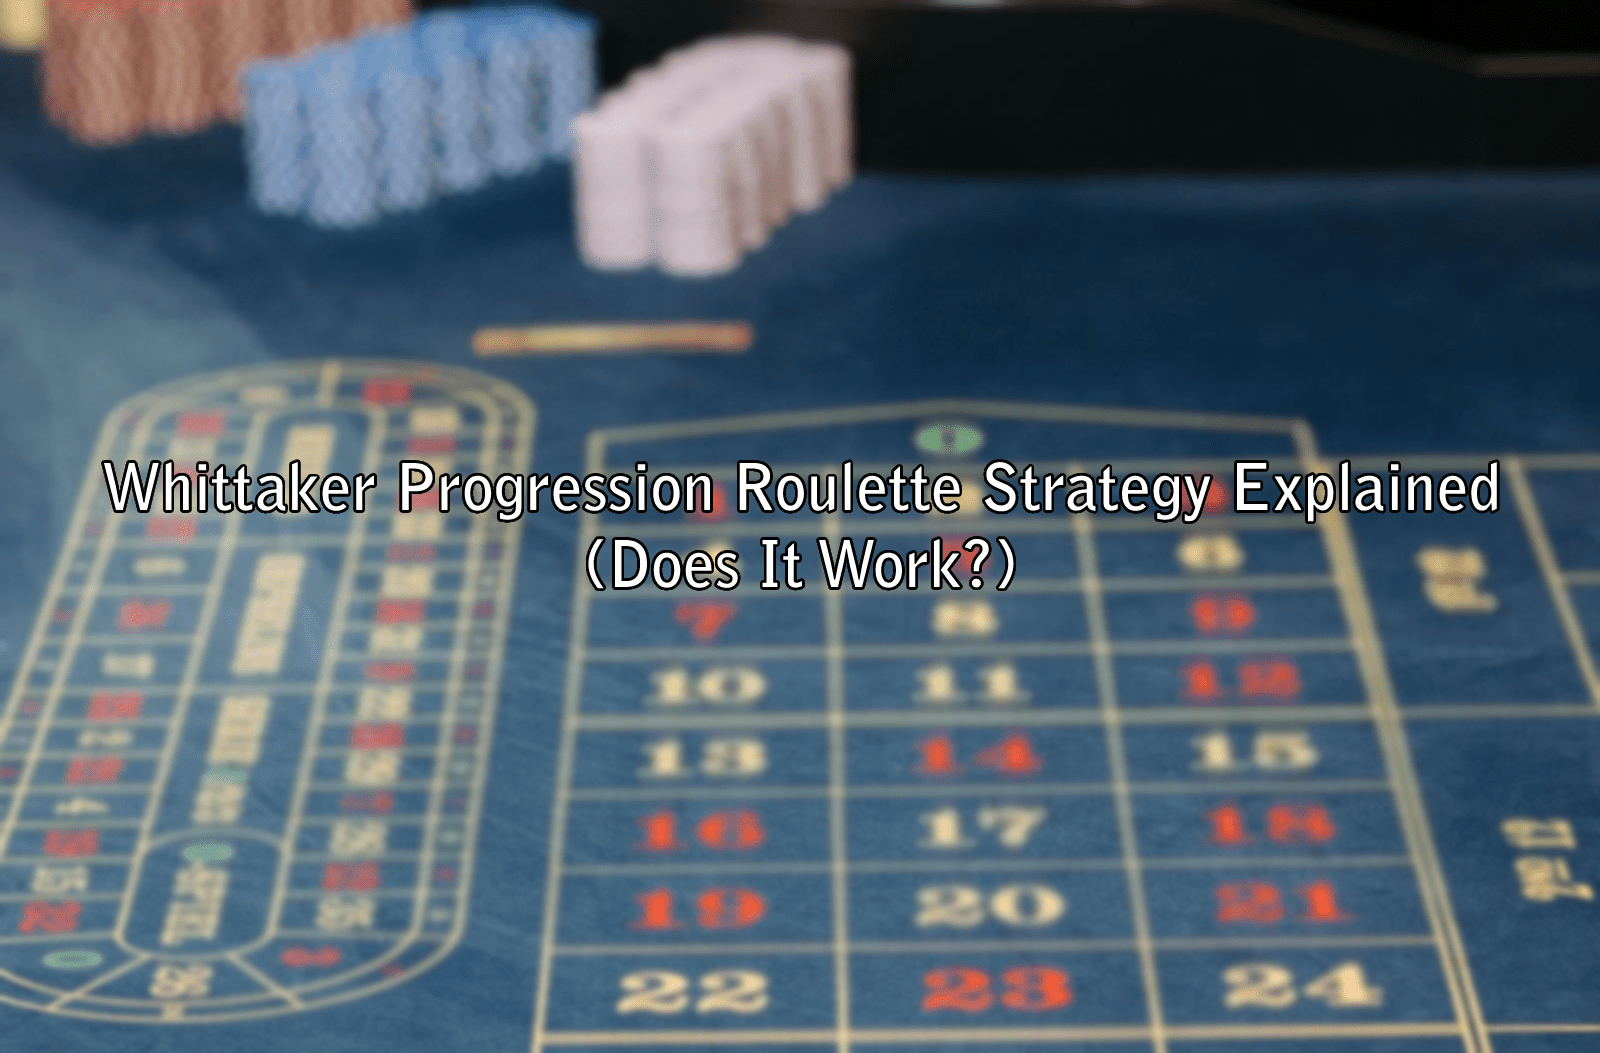 Whittaker Progression Roulette Strategy Explained (Does It Work?)